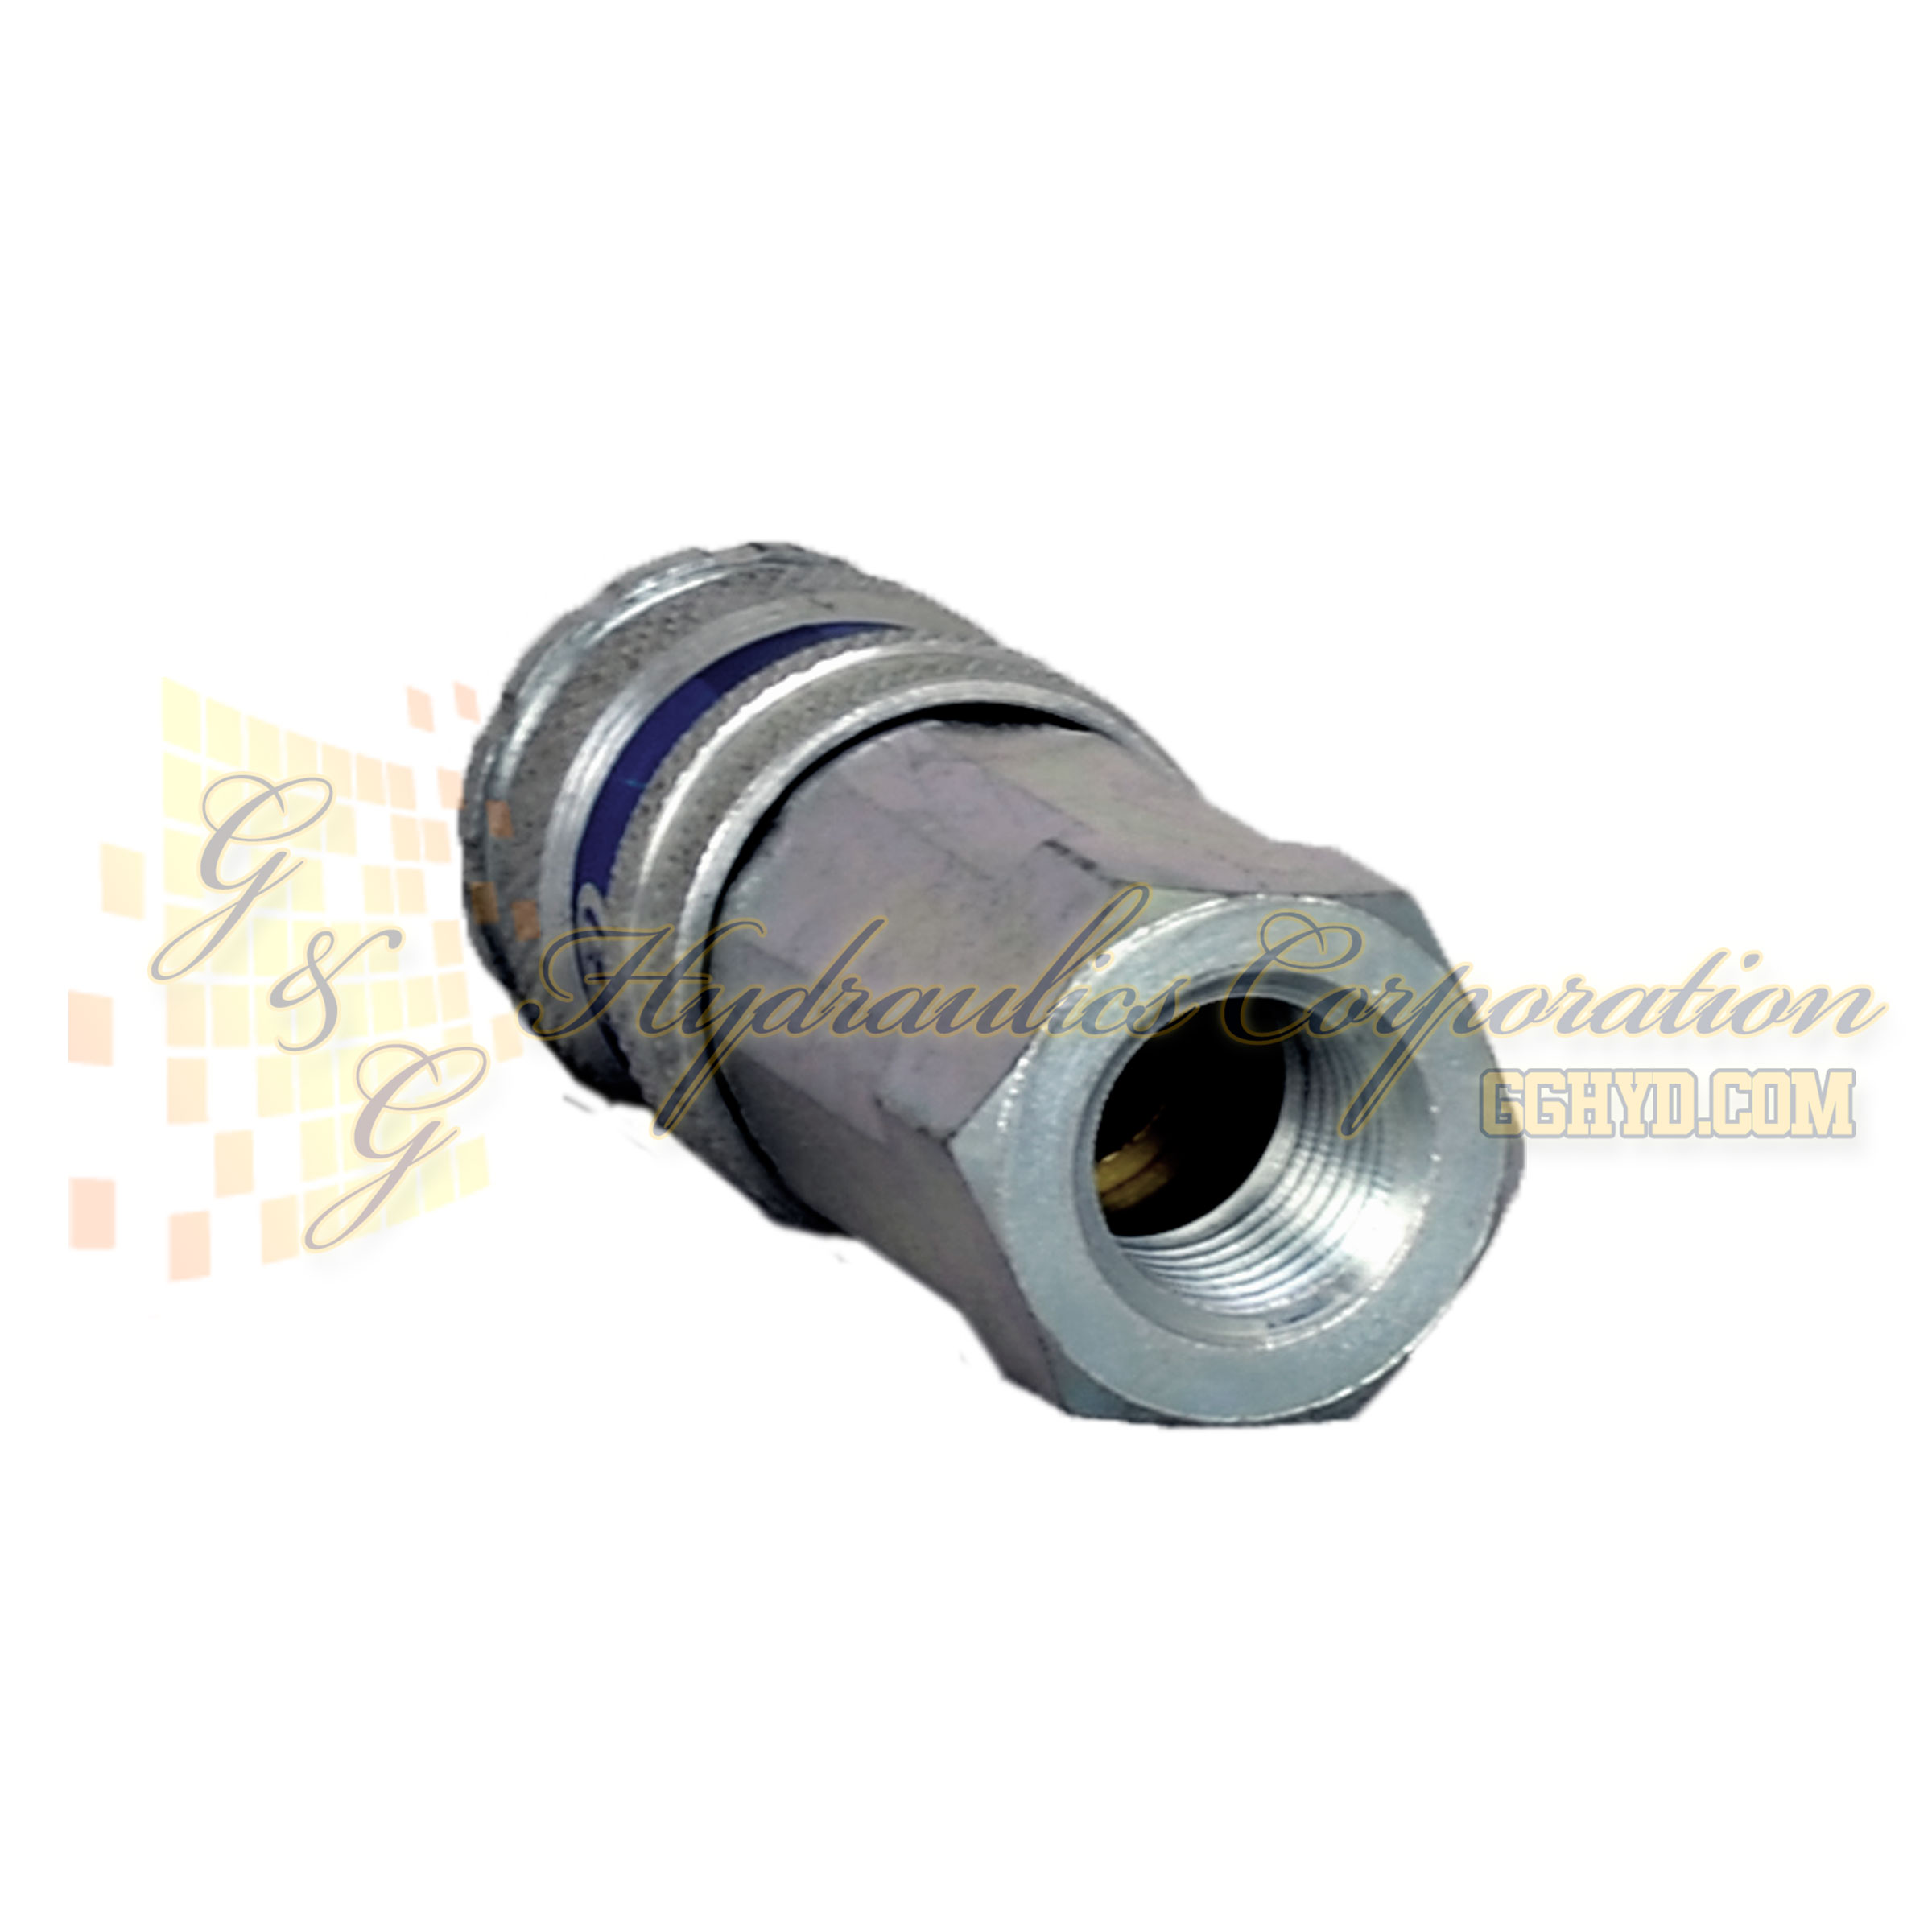 10-320-1402 CEJN Standard and Vented Safety Coupler, 1/4" NPT Female Threads